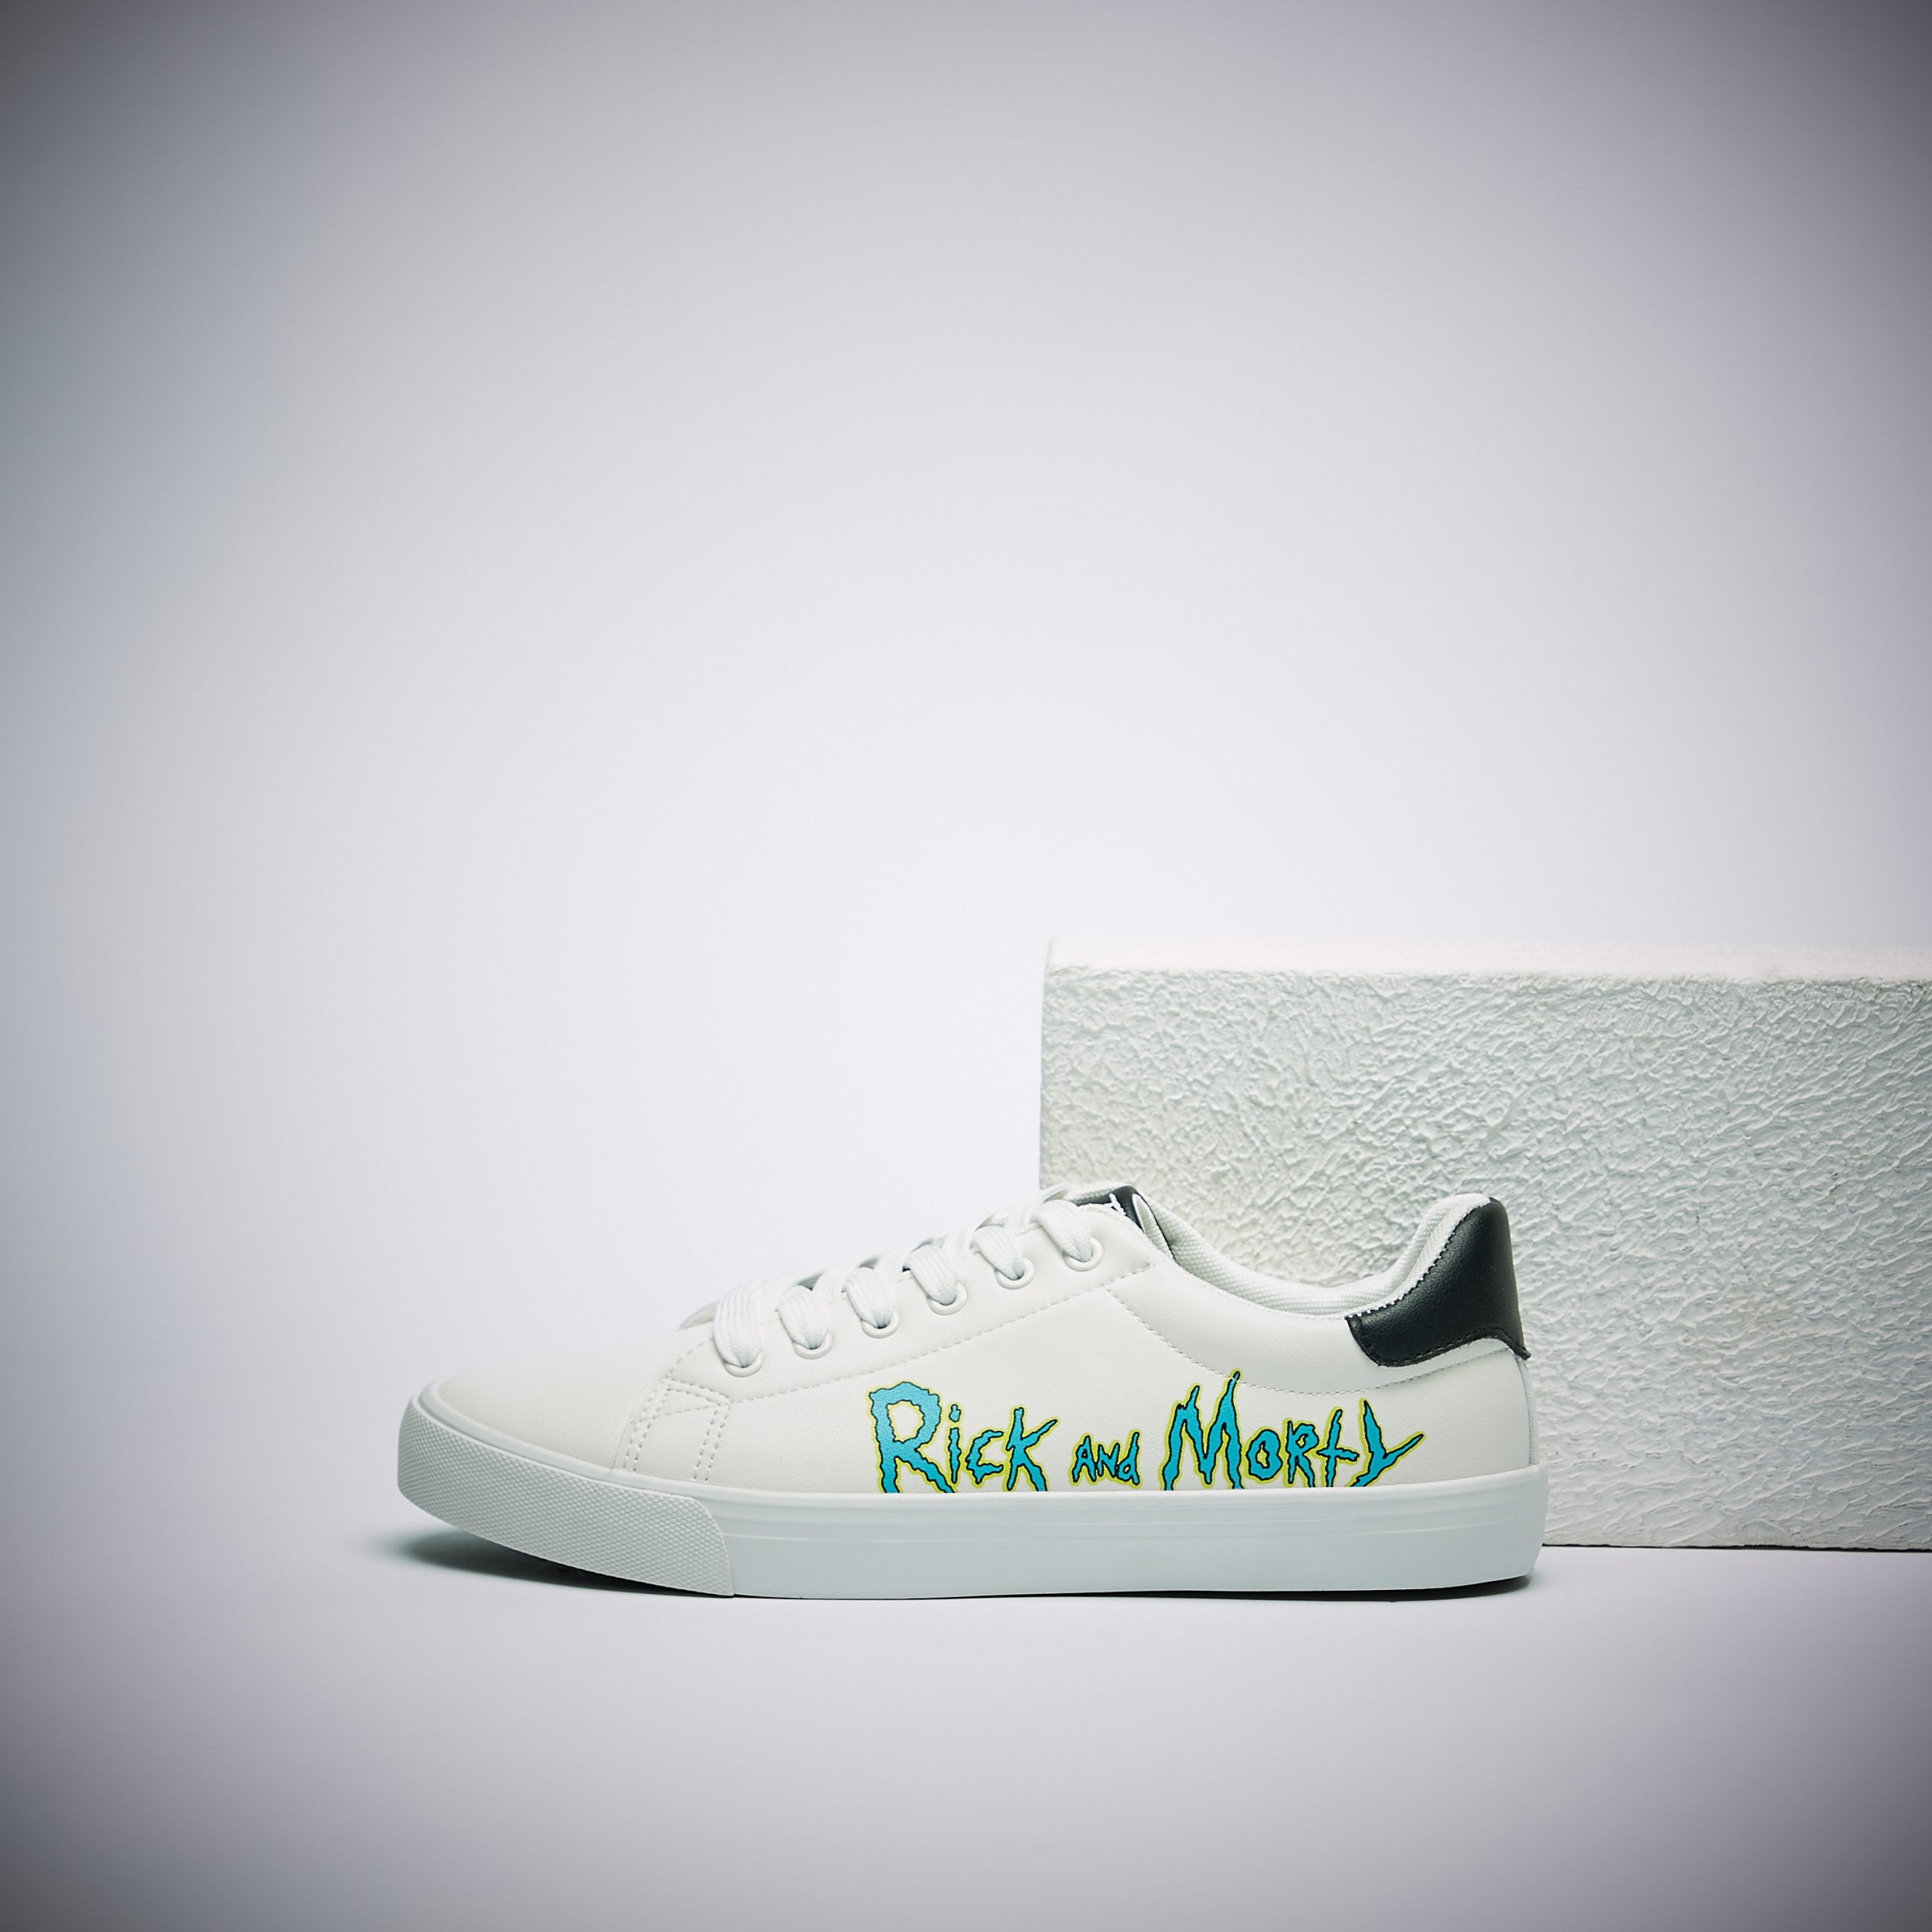 Rick and morty shoes: The Wubba Lubba Dub Dub World of it插图3